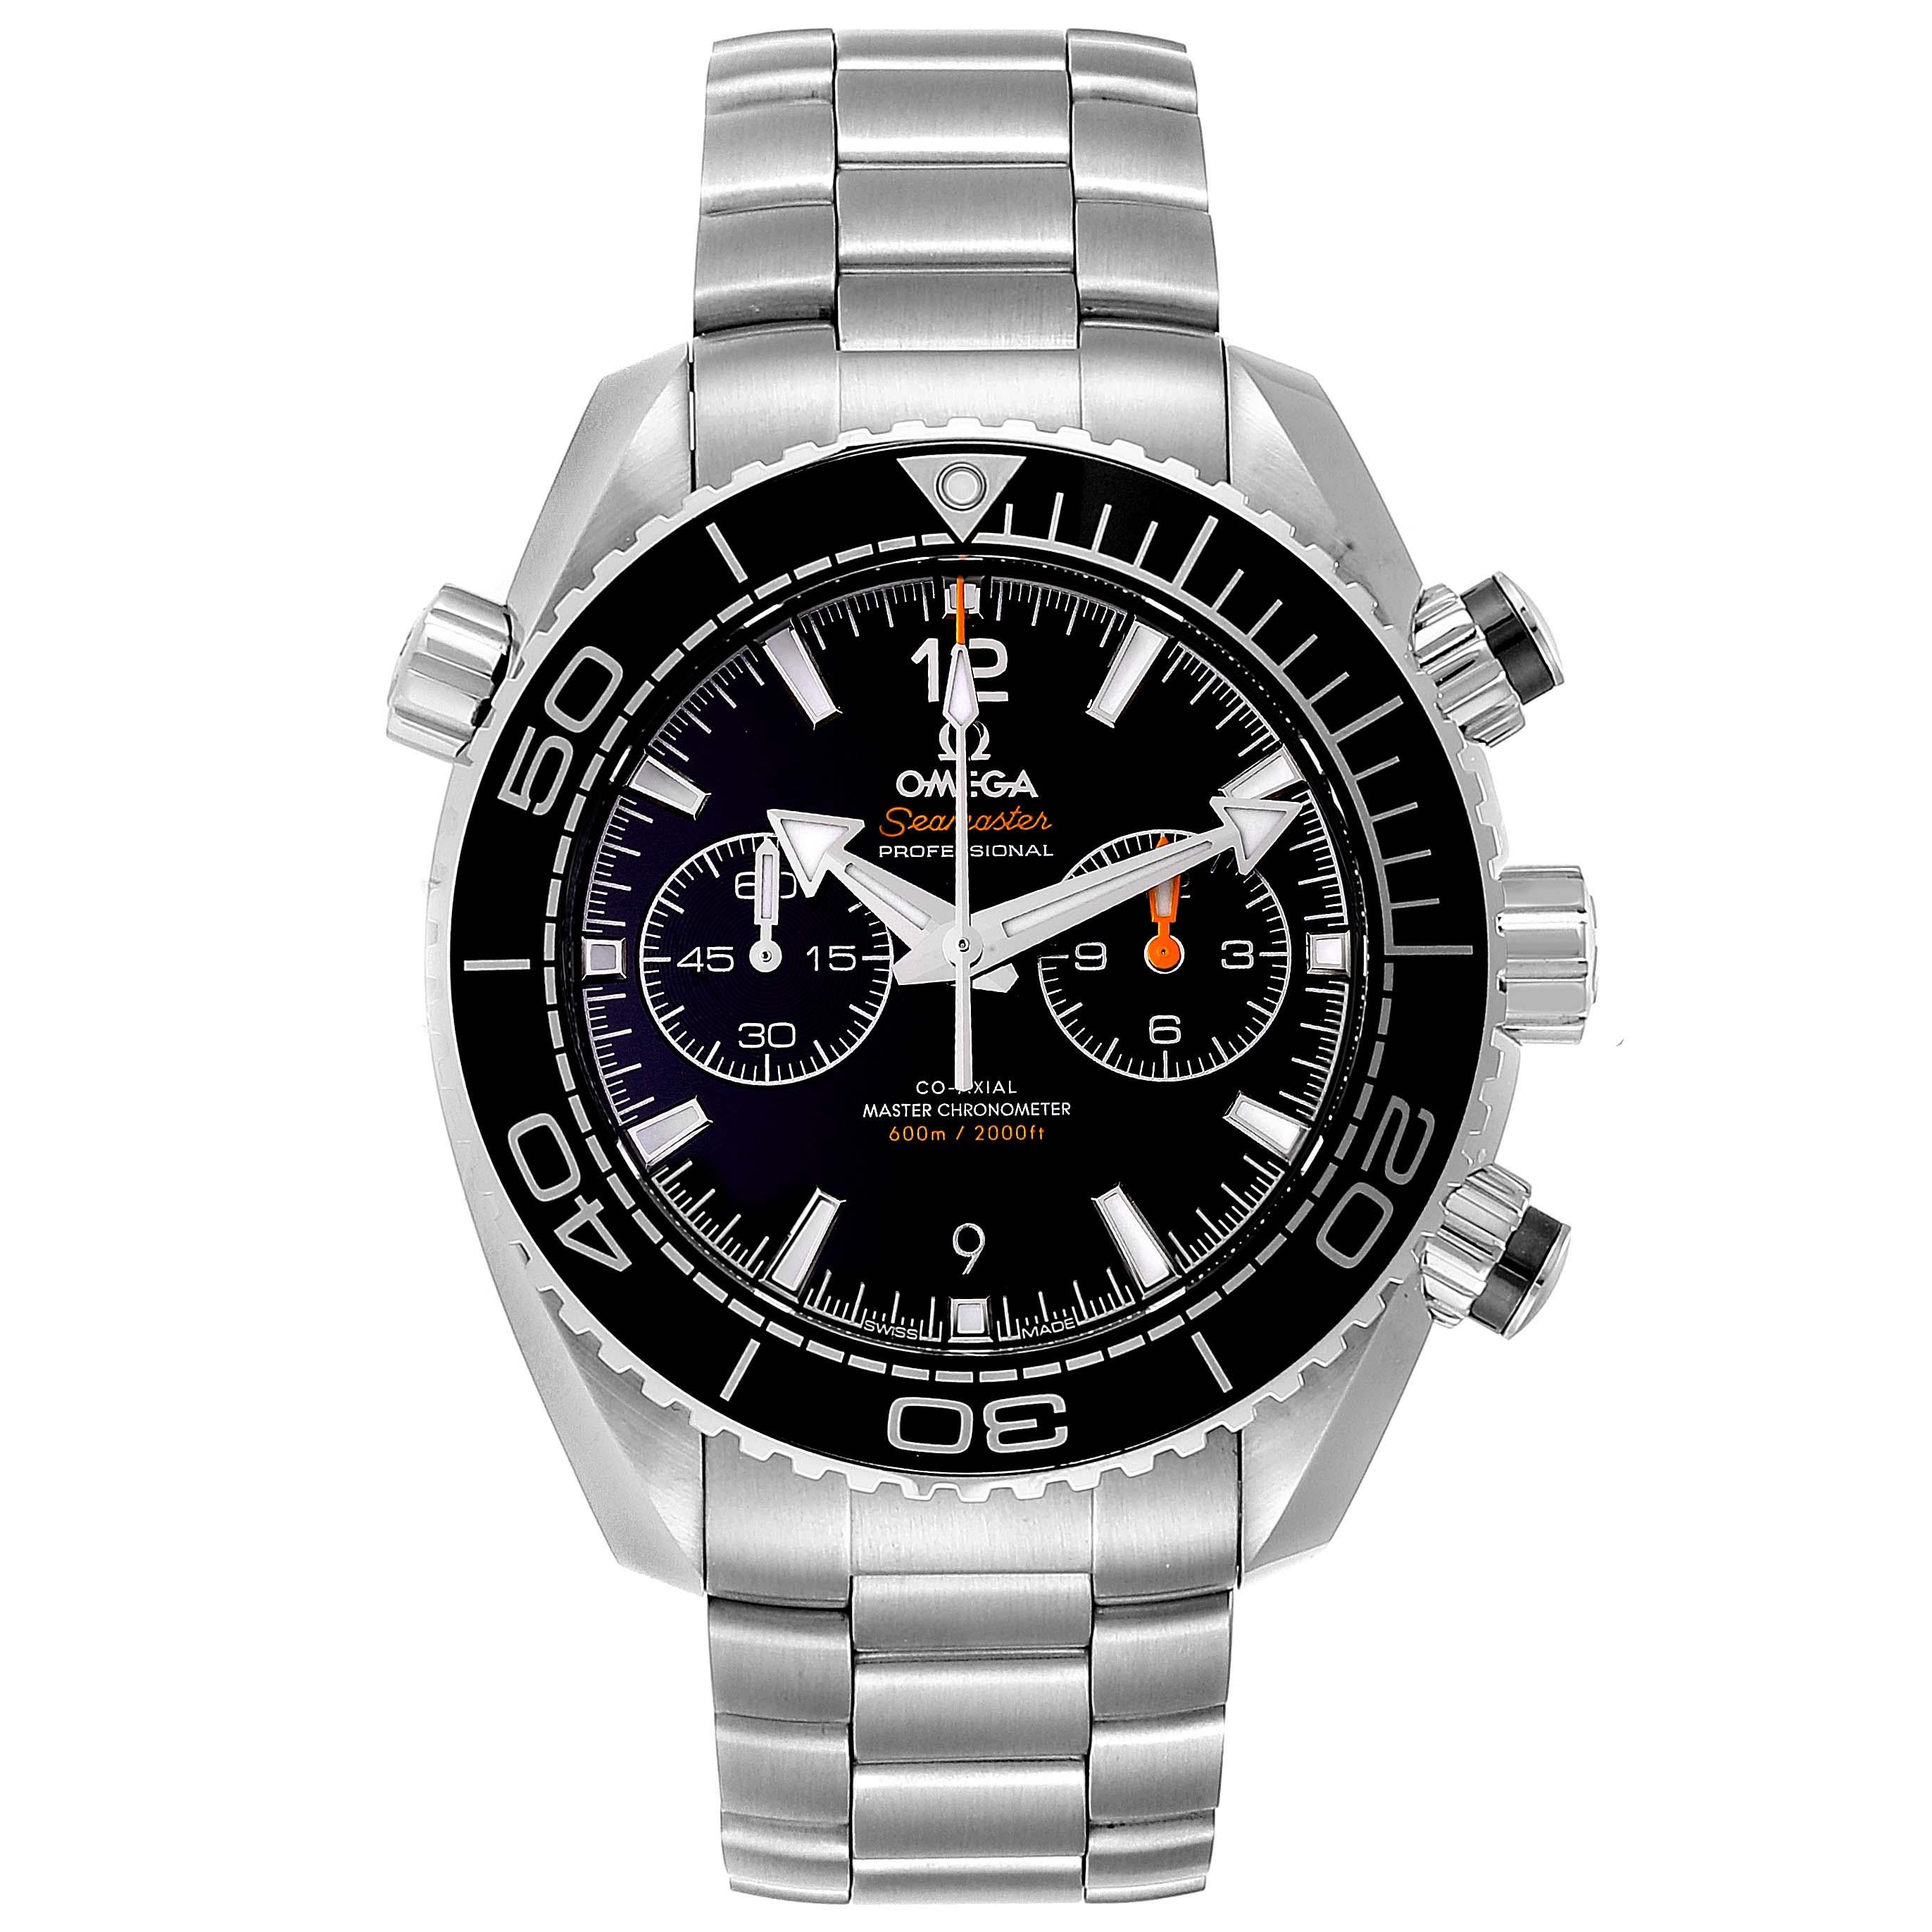 Omega Seamaster Planet Ocean 600M Watch 215.30.46.51.01.001 Box Card. Automatic self-winding chronograph movement with with column wheel and Co-Axial escapement. Certified Master Chronometer, approved by METAS, resistant to magnetic fields